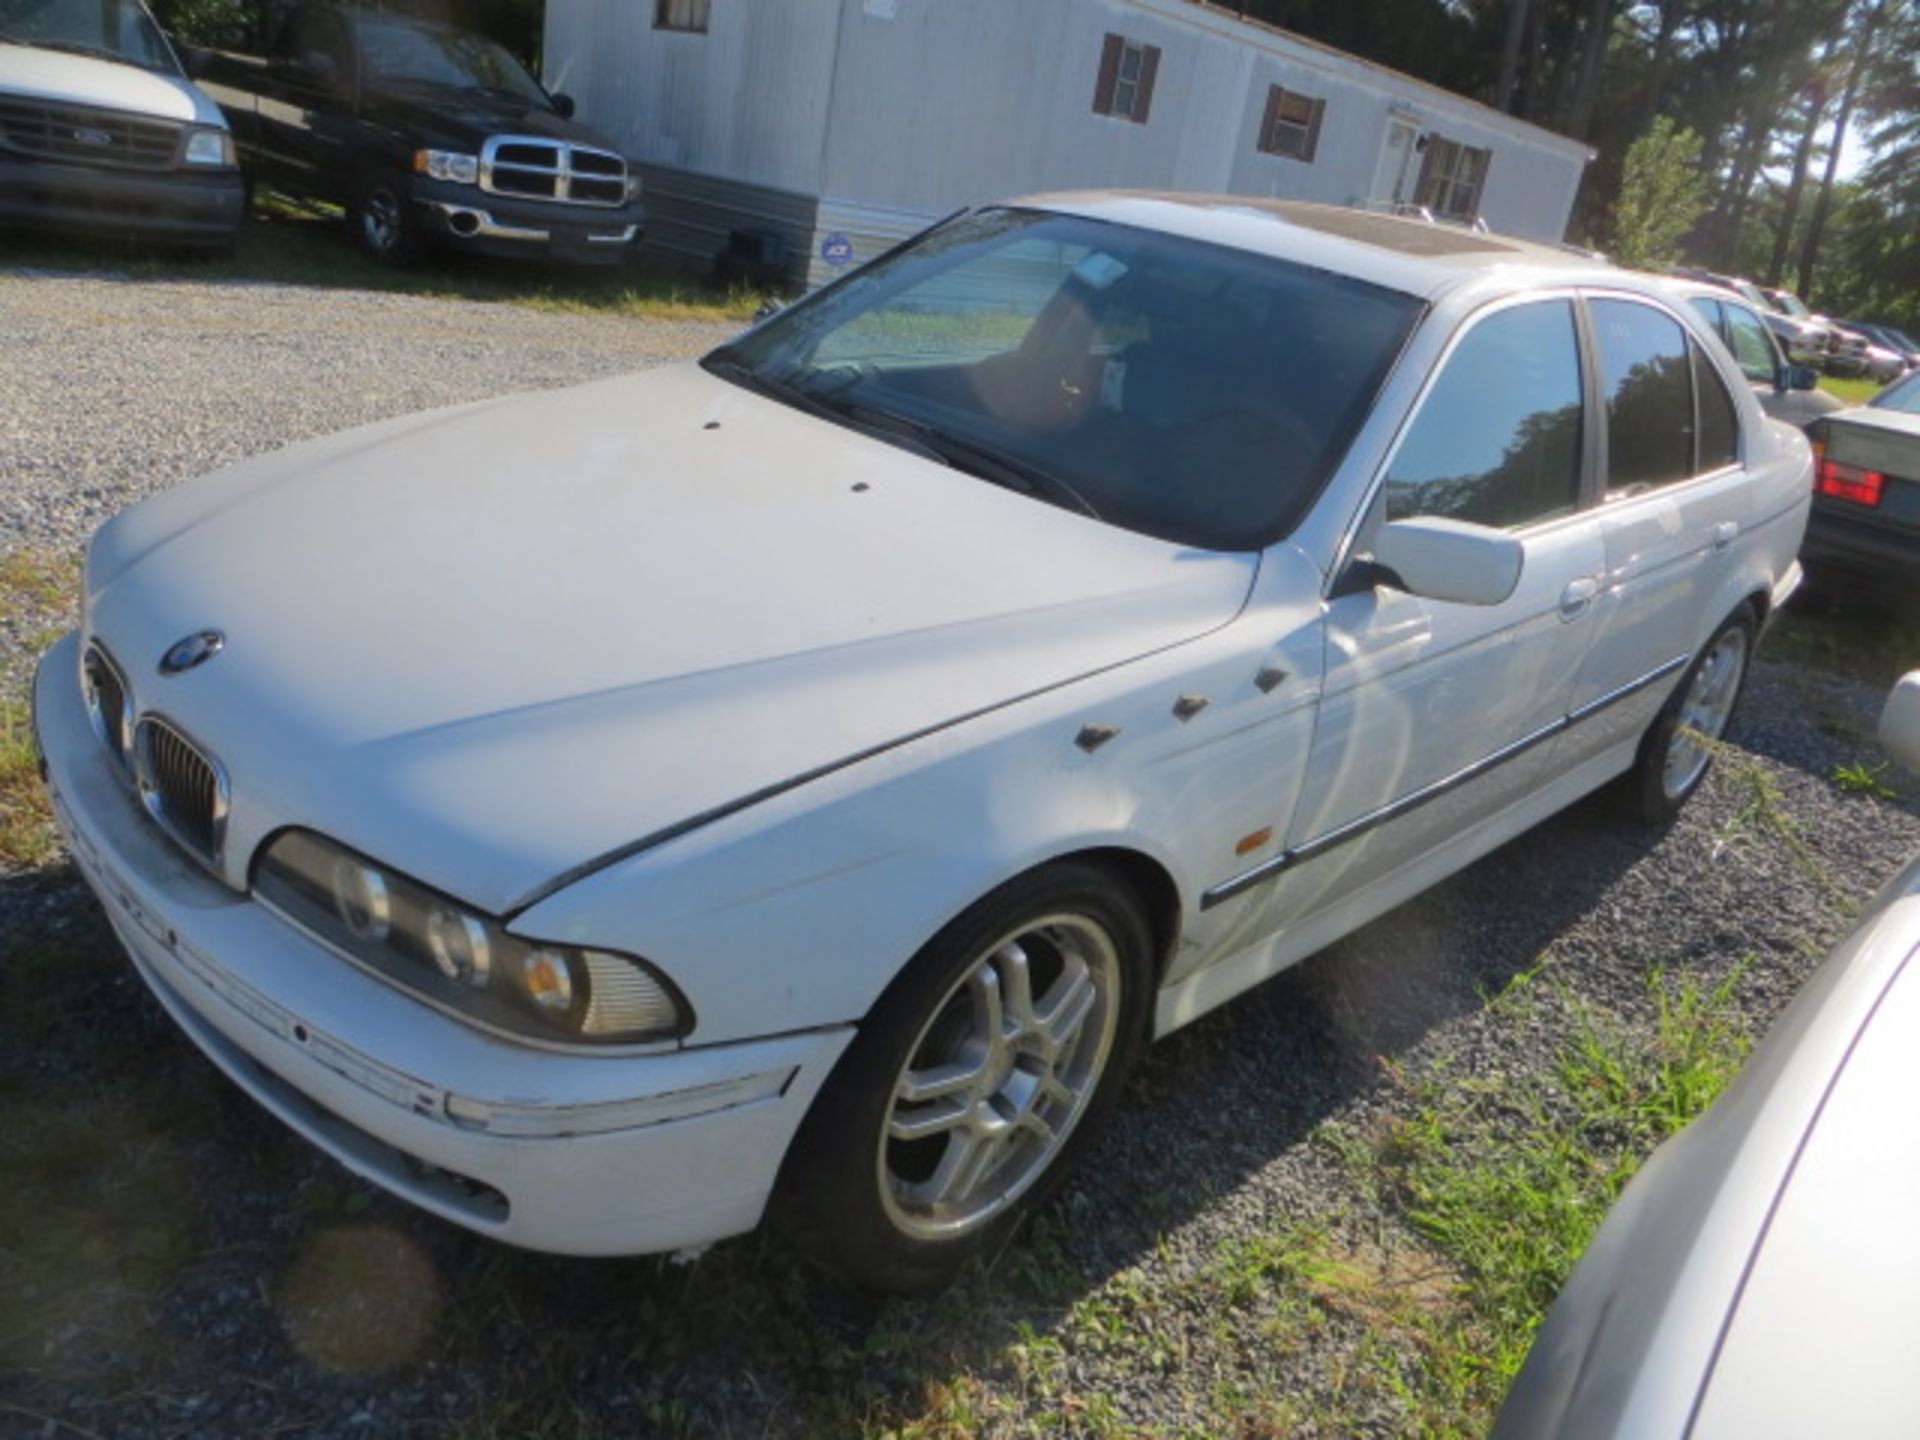 1999 BMW 528i-PAINT PEELING-BAD MIRROR 126000 MILES,VIN WBADM6343XBY34055, SOLD W/ GOOD TRANSFERABLE - Image 2 of 3